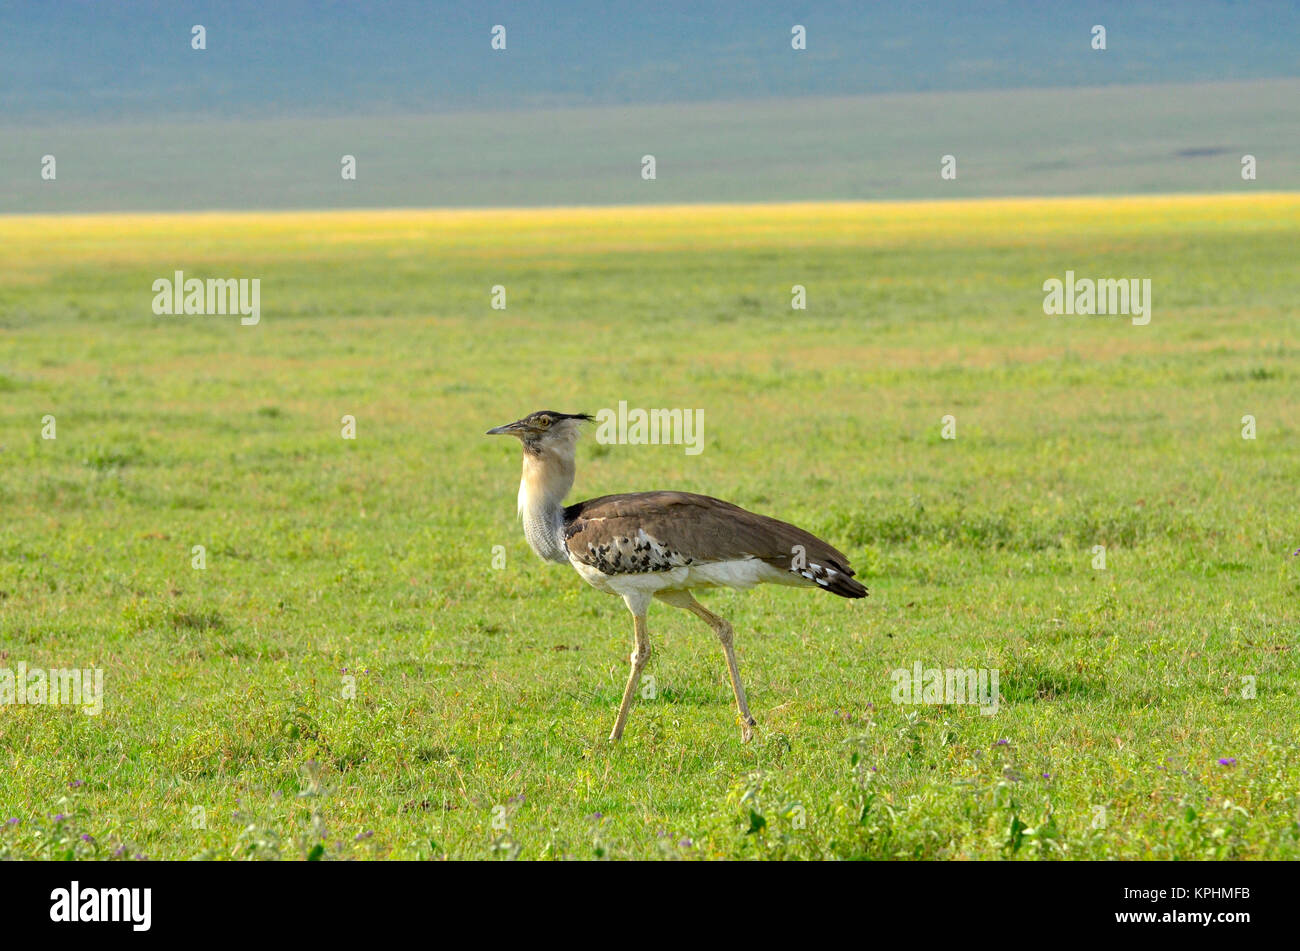 Ngorongoro crater, a World Heritage Site in Tanzania. Incredible wildlife variety for enjoyment by tourists. Kori bustard strutting to attract female. Stock Photo